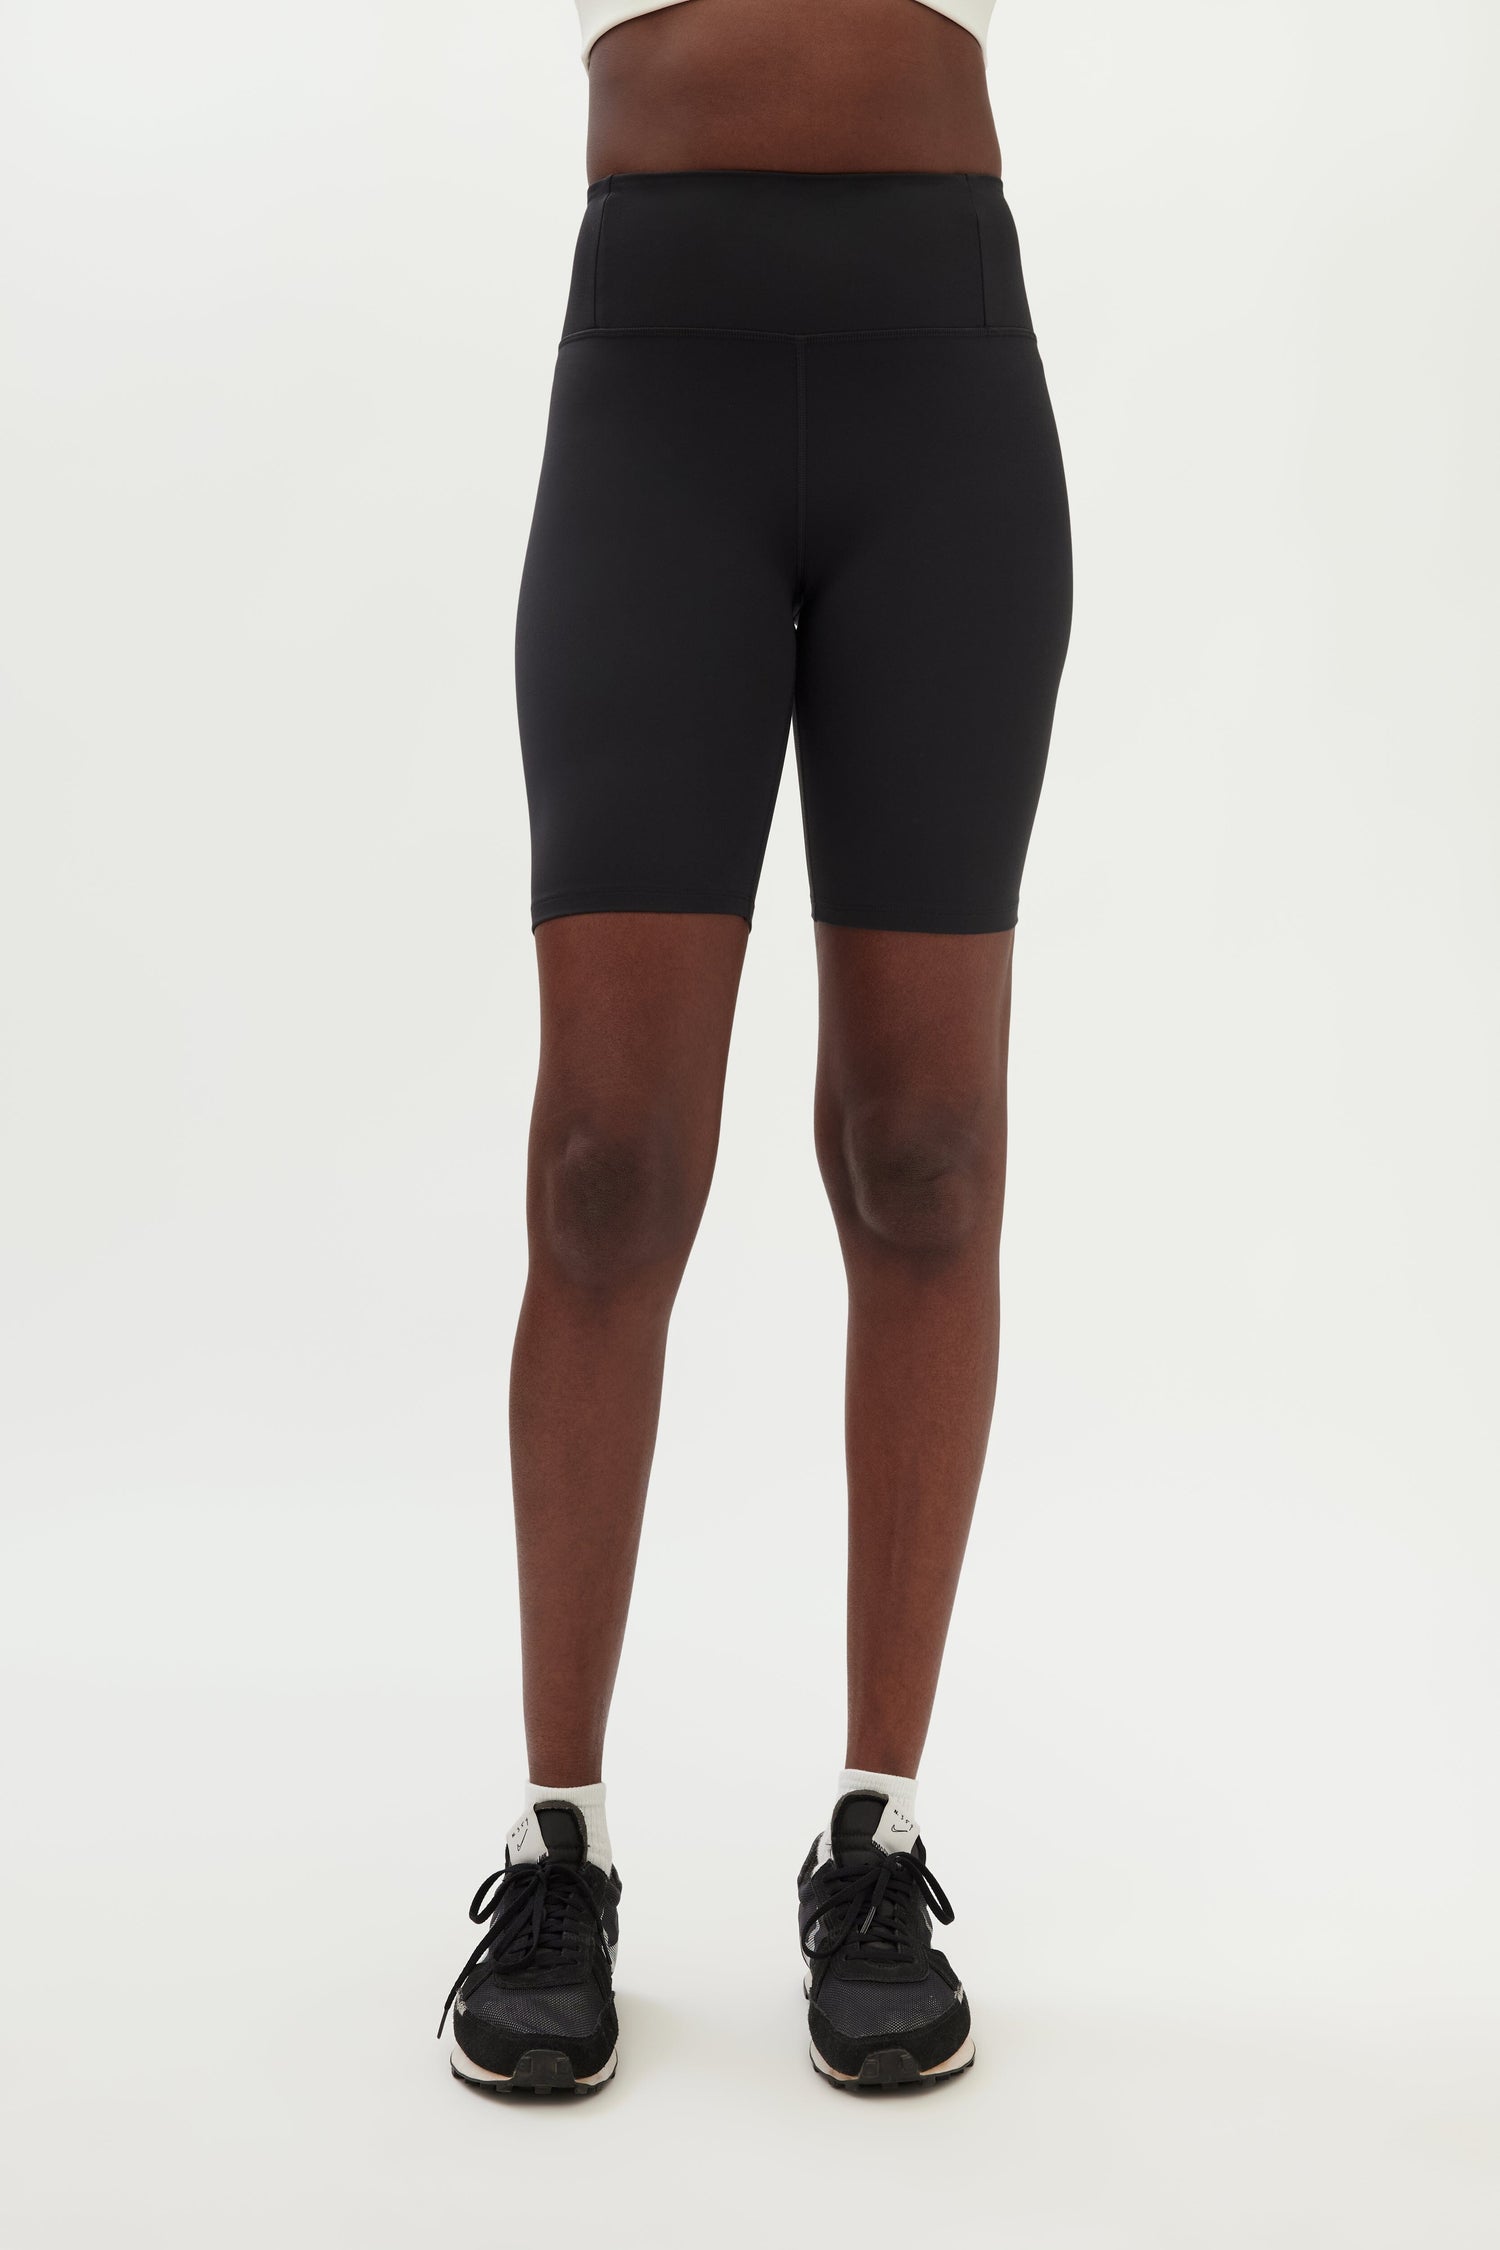 Girlfriend Collective W's Float High-Rise Bike Shorts - Made from recycled plastic bottles Black Pants